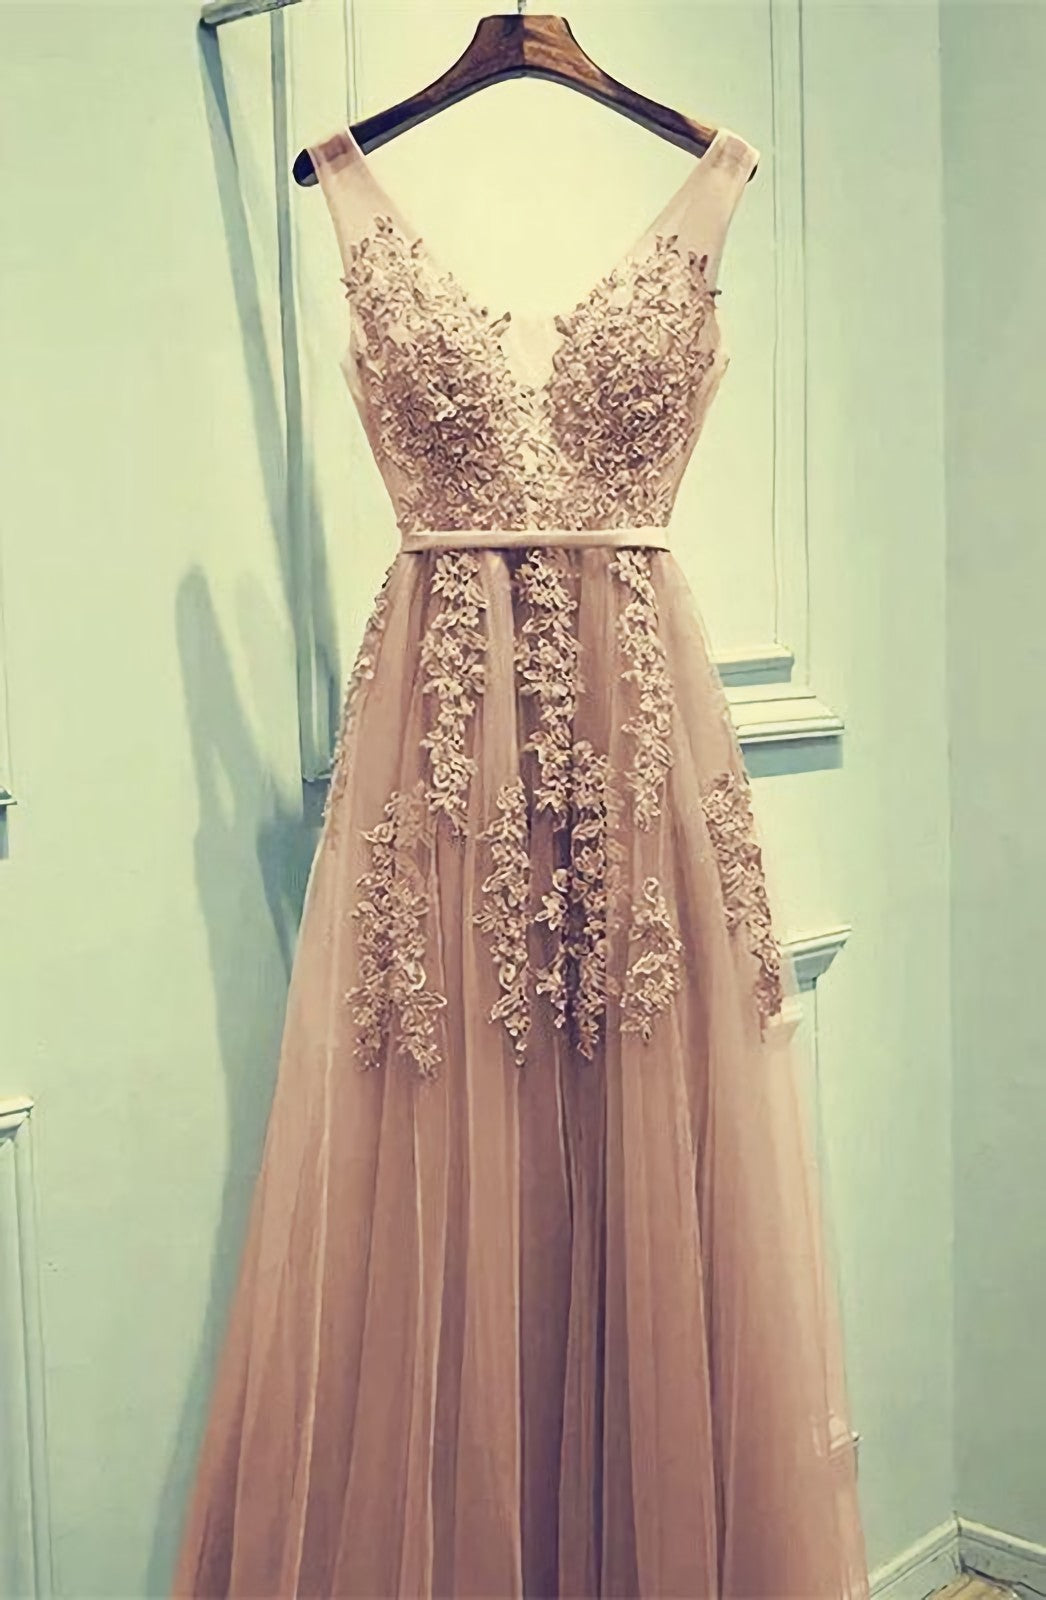 Night Club Outfit, Lace Prom Dresses, Champagne Tulle Bridesmaid Dresses, Appliques